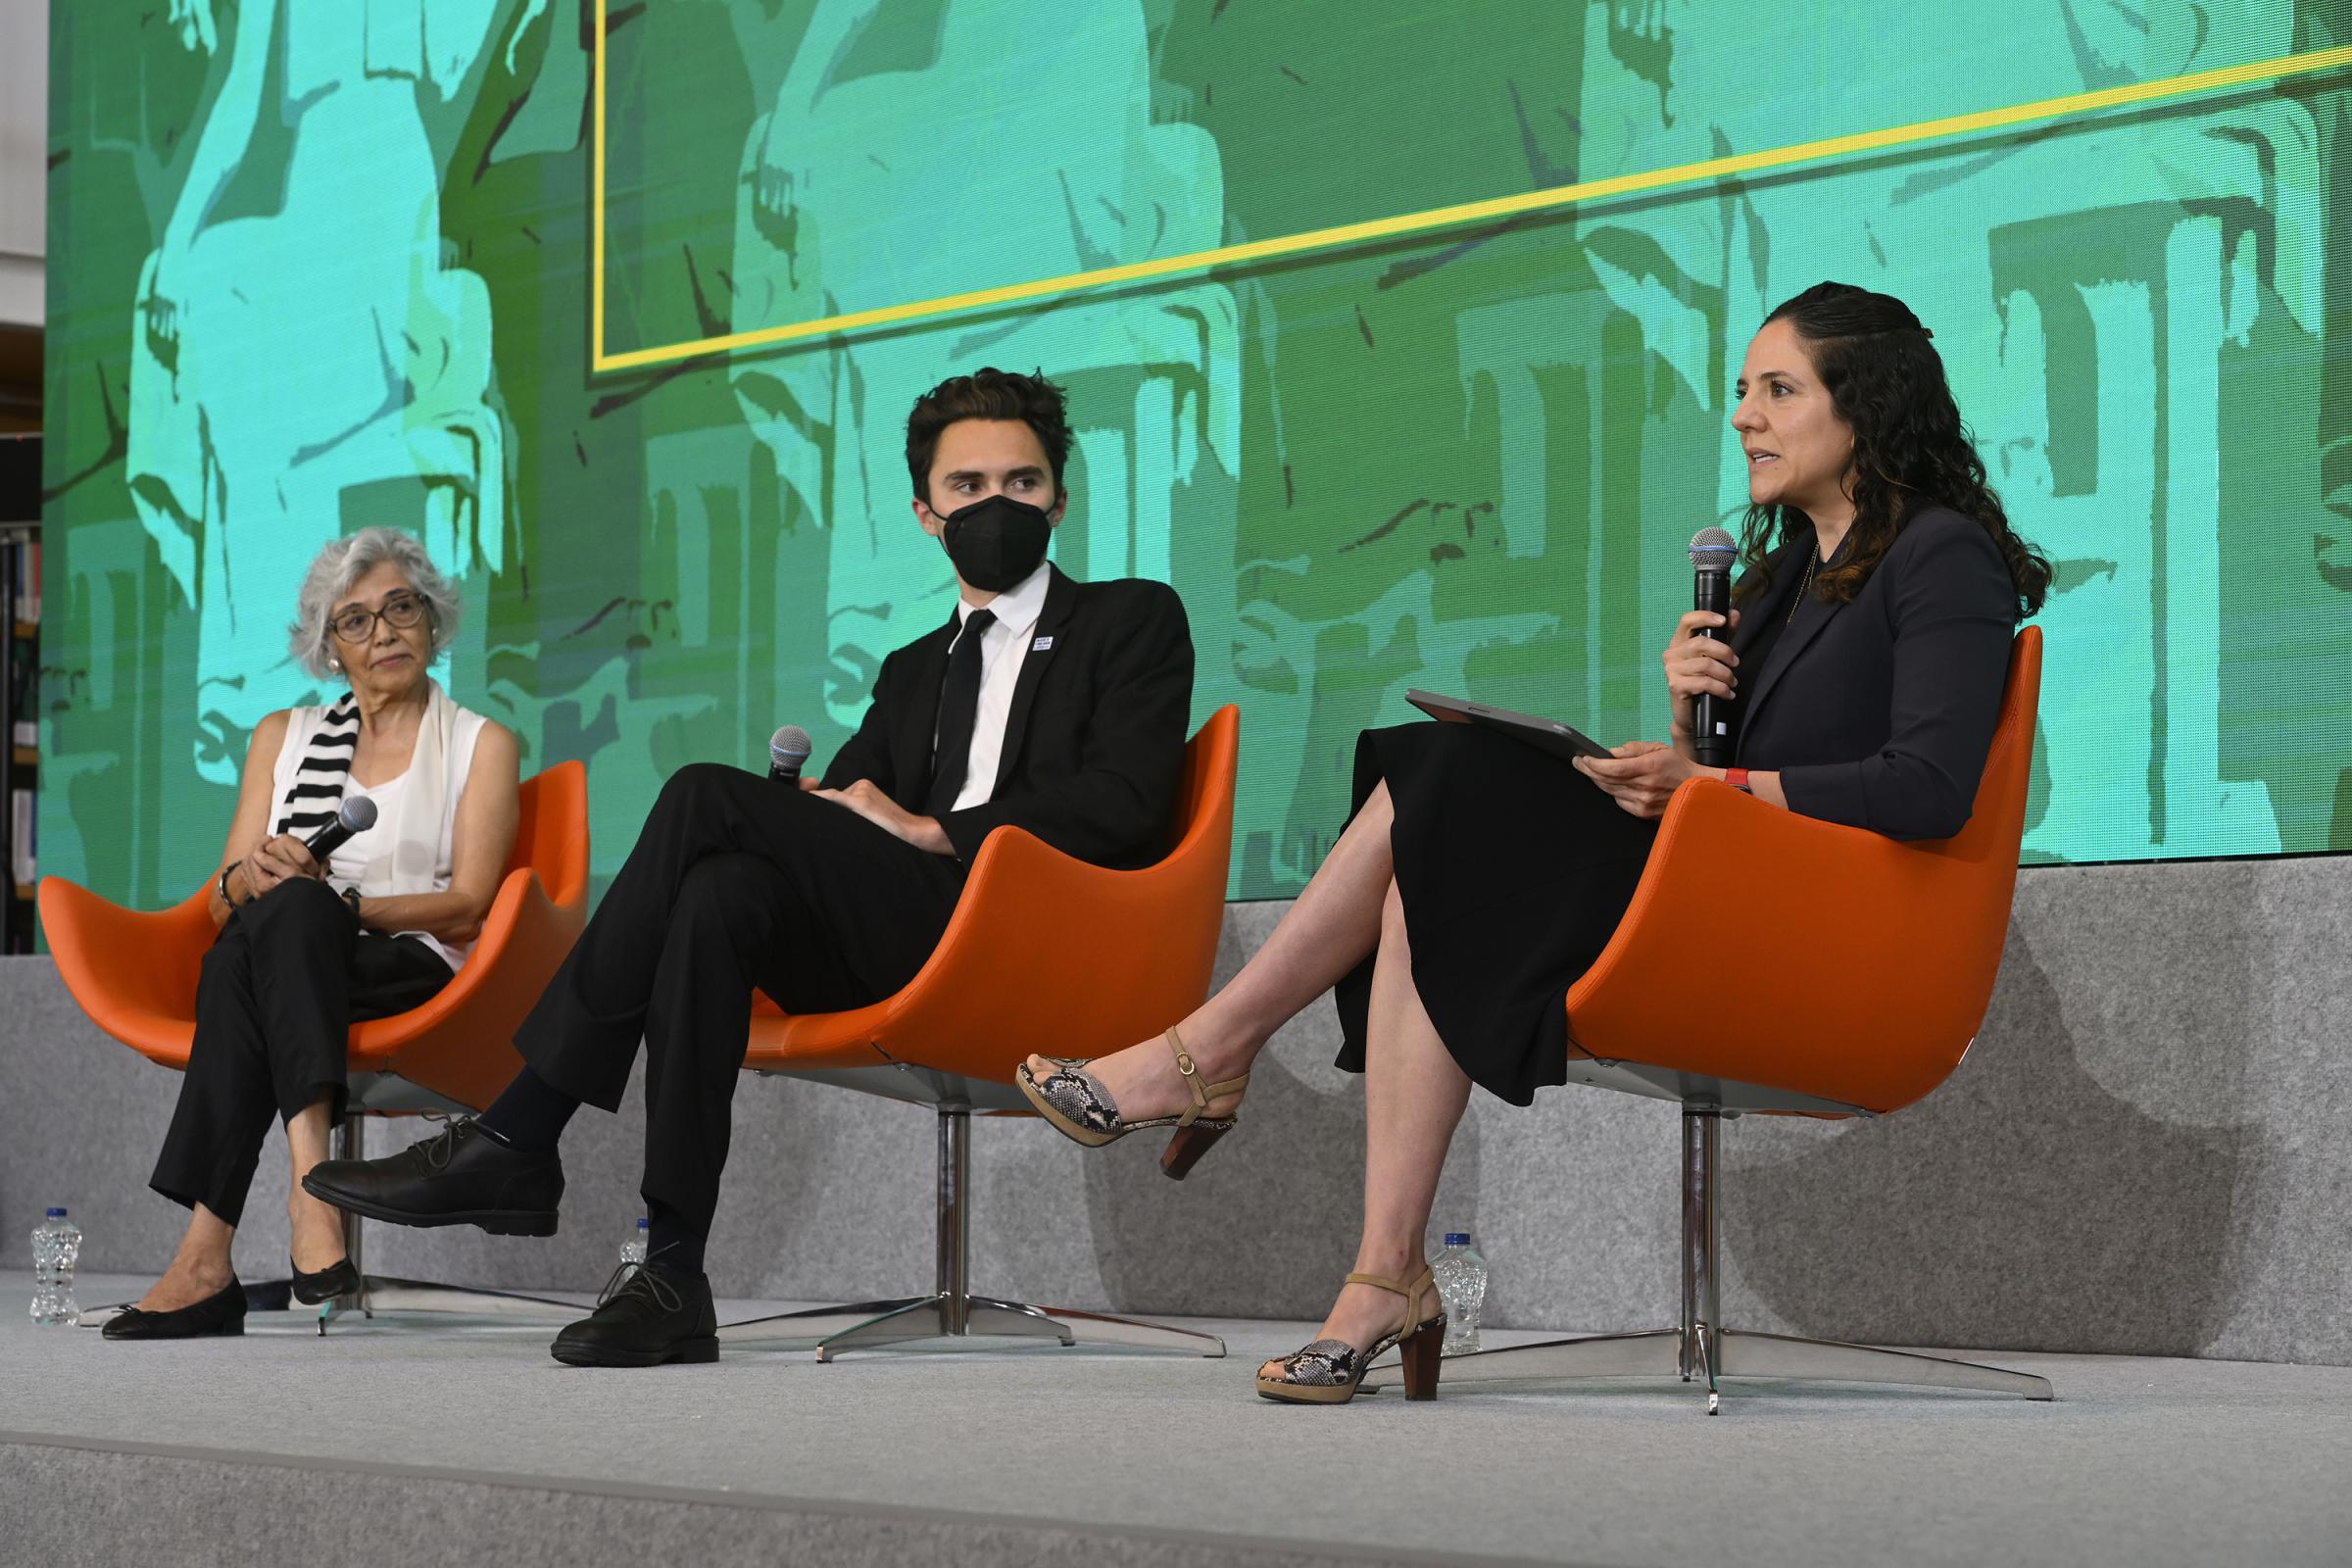 three panelists on stage in orange chairs